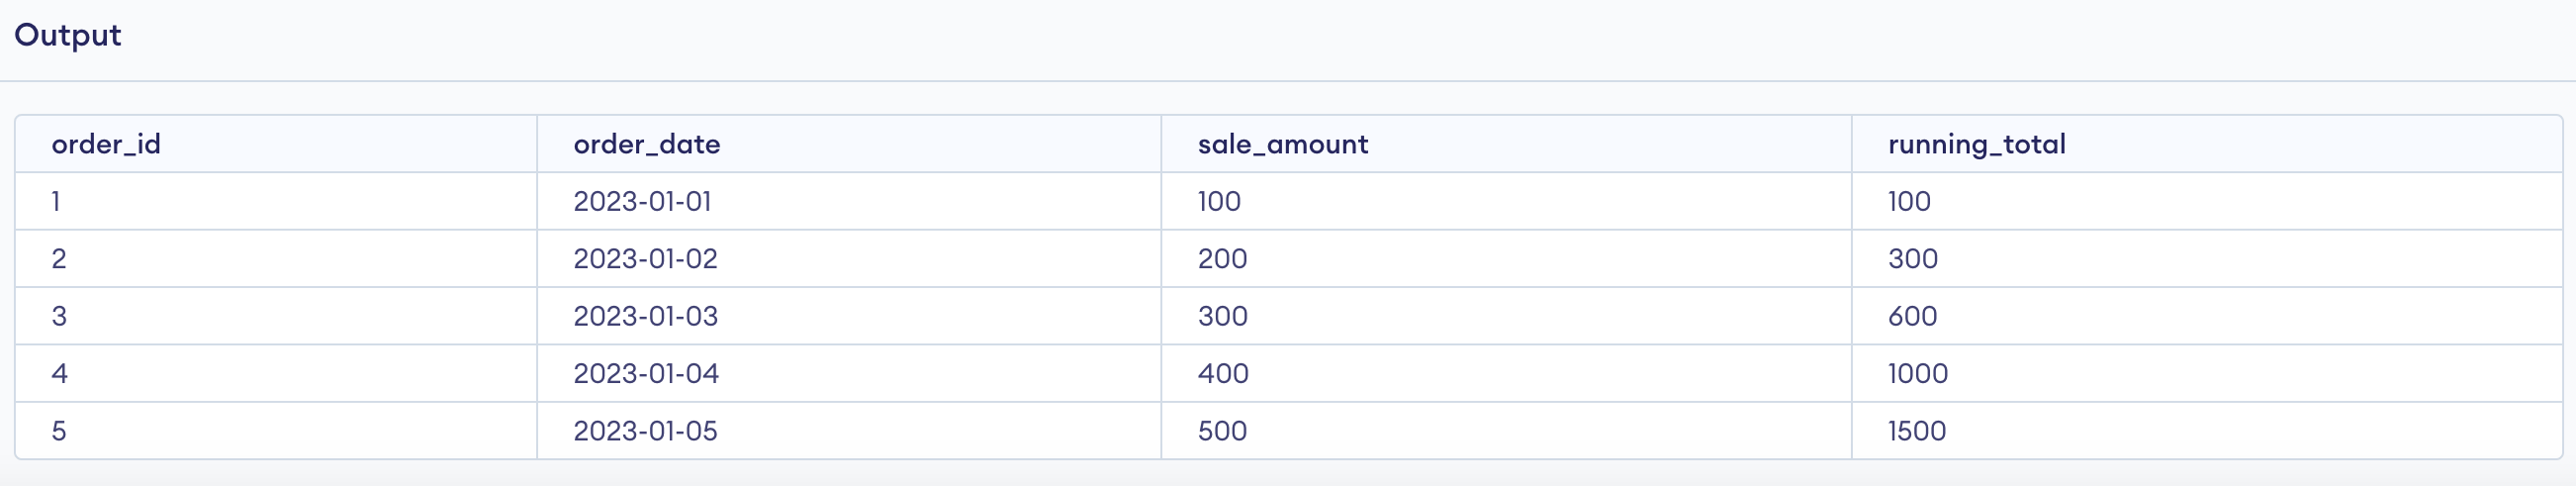 SQL running total output for sales with order_id as first column